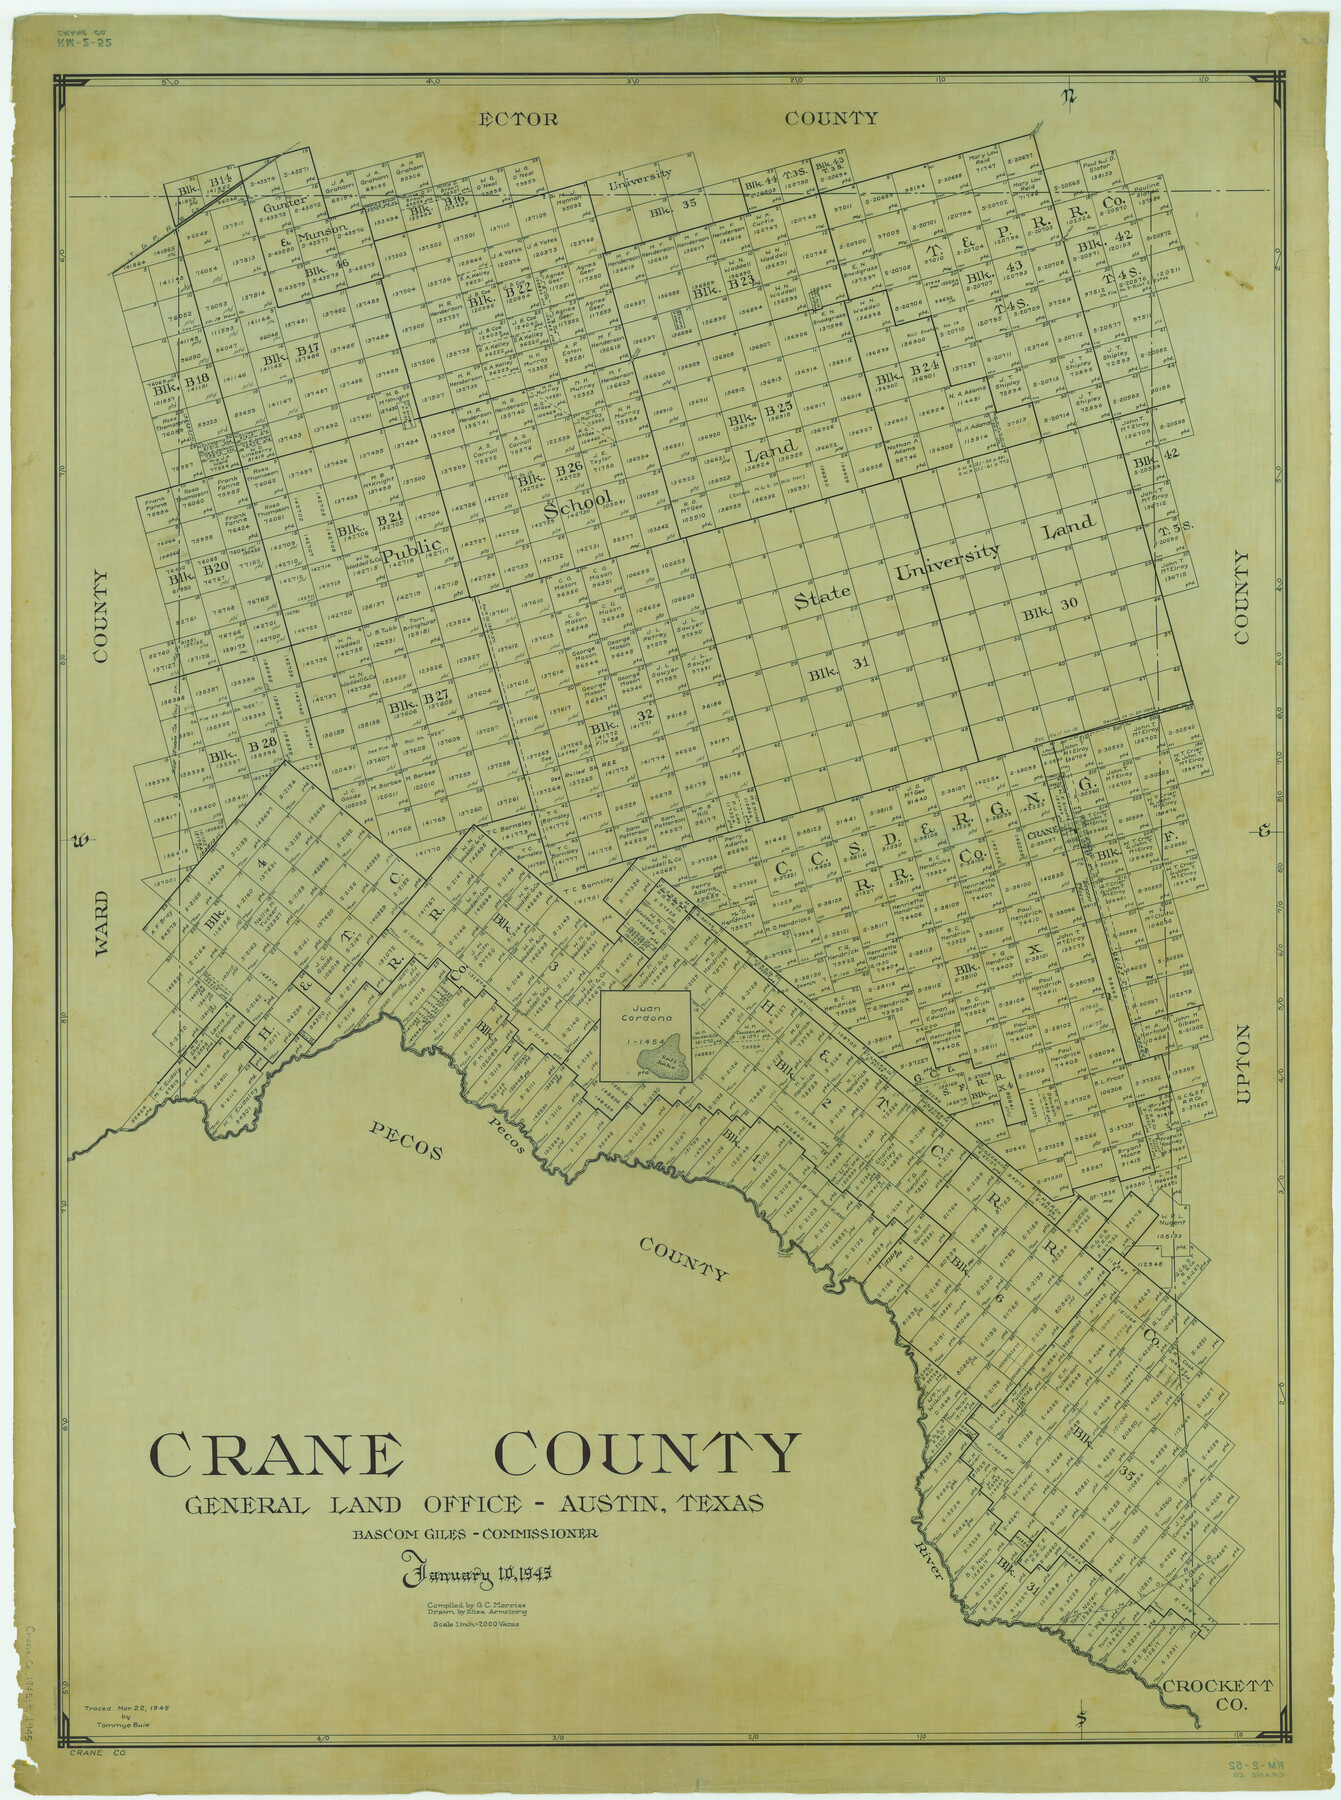 1811, Crane County, General Map Collection